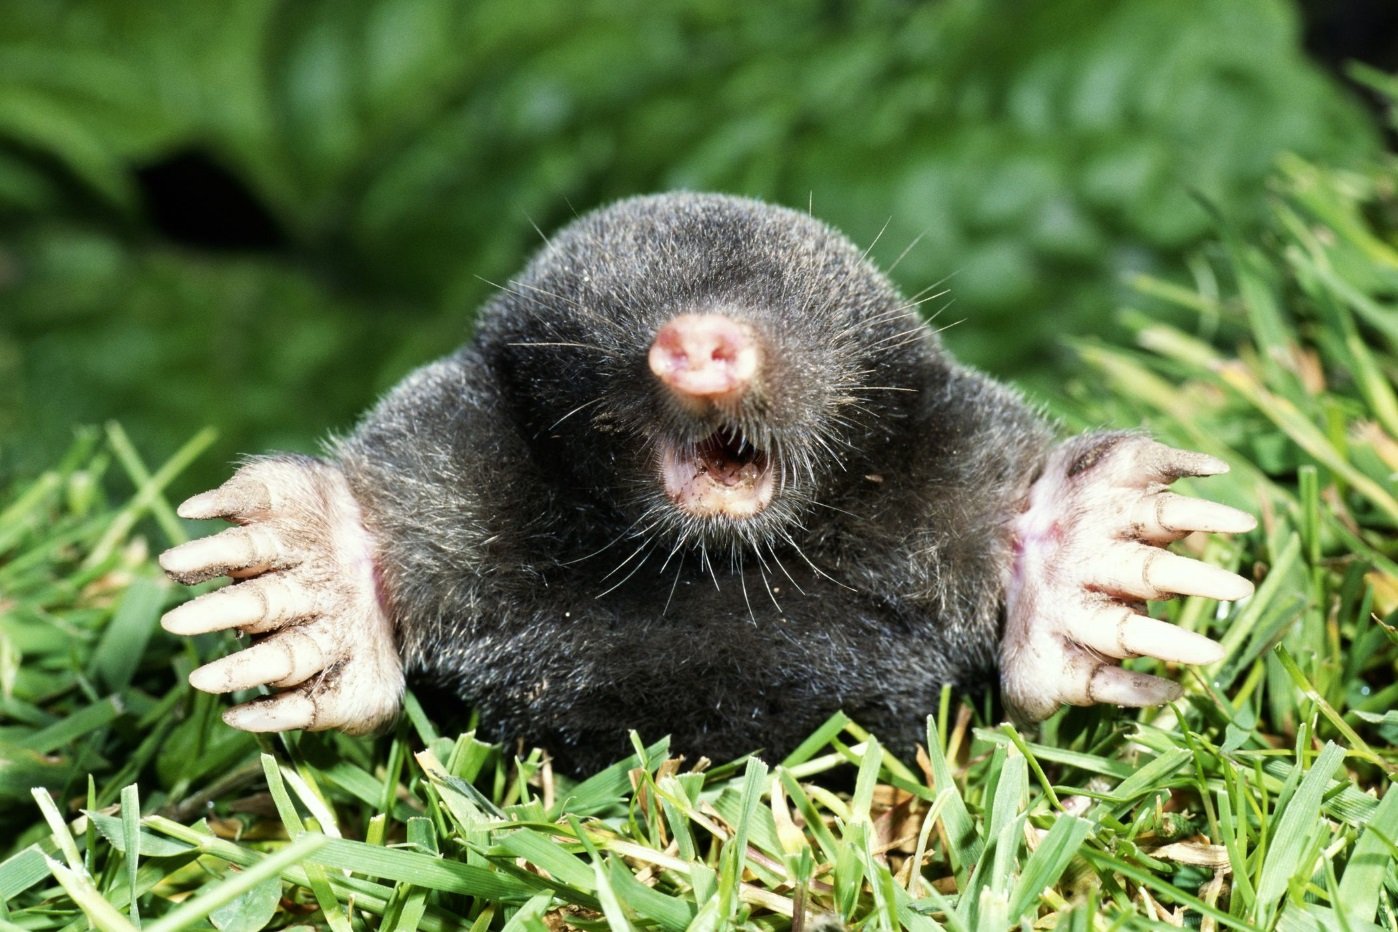 Image of a mole commonly found around homes